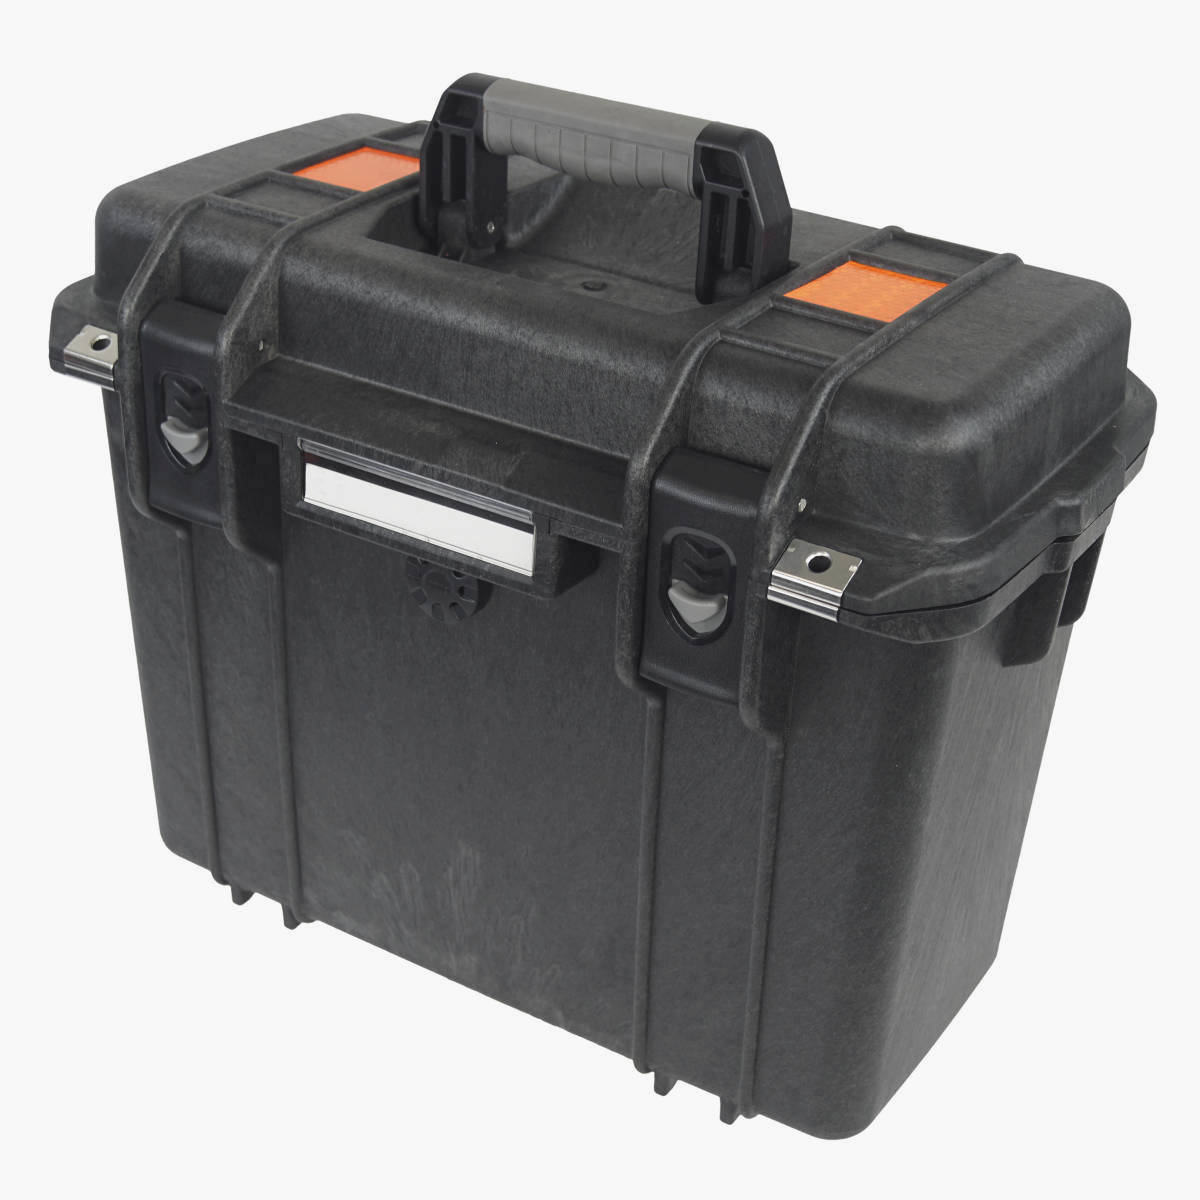 Centurion Dry Box - Small - With Cubed Foam  Lomo Watersport UK. Wetsuits,  Dry Bags & Outdoor Gear.